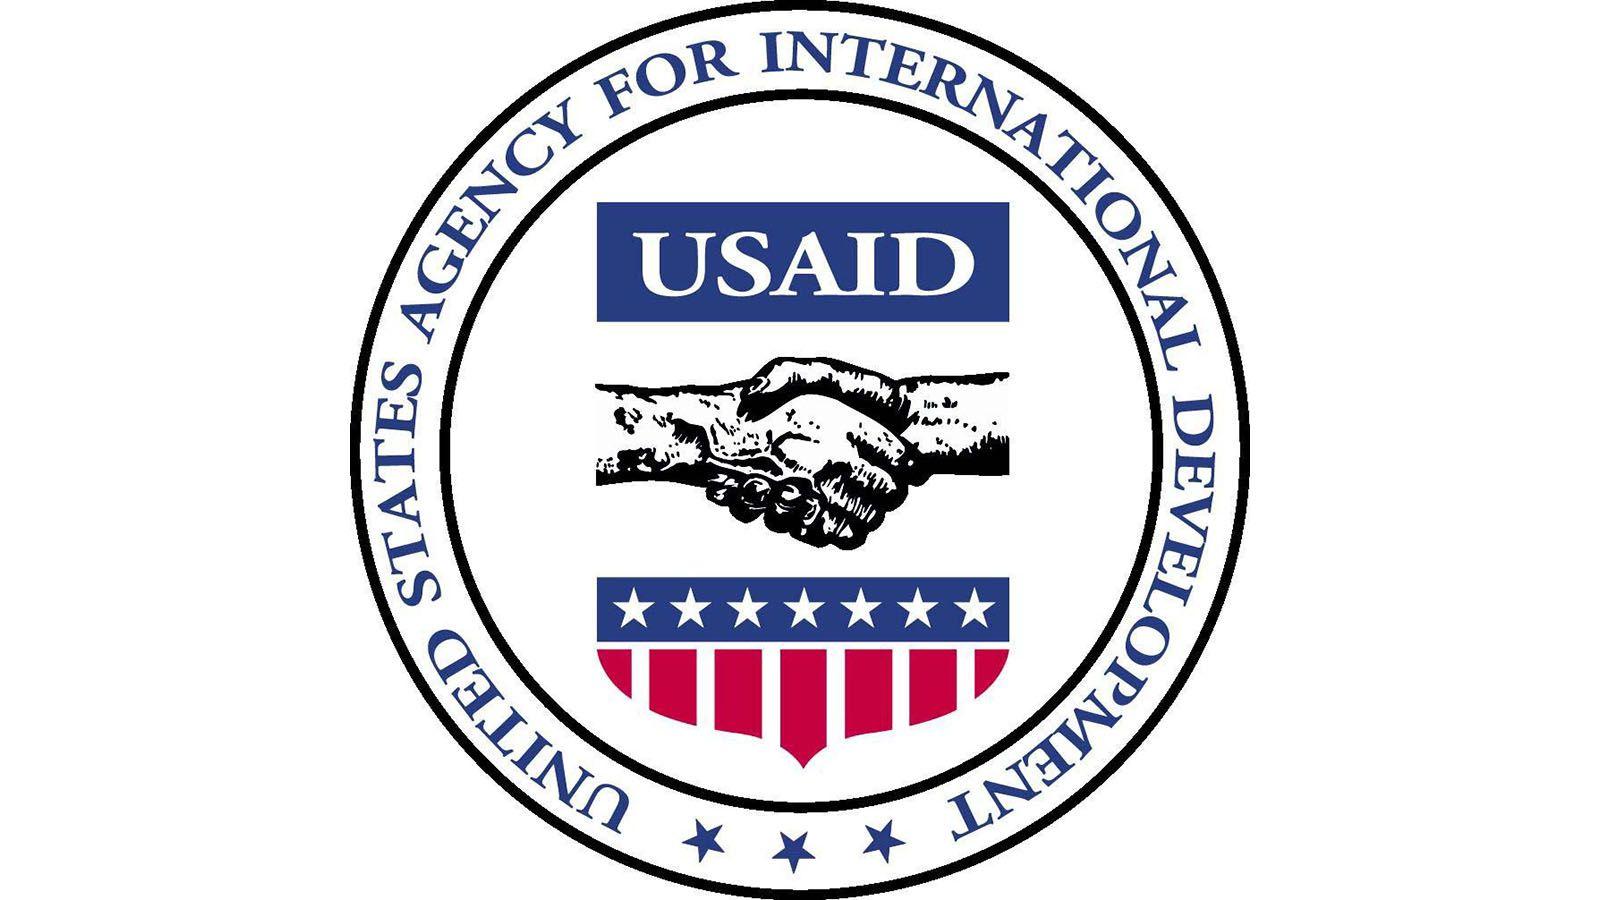 USAID Logo - USAID Nominee Pledges Support for LGBTQ Human Rights. Human Rights